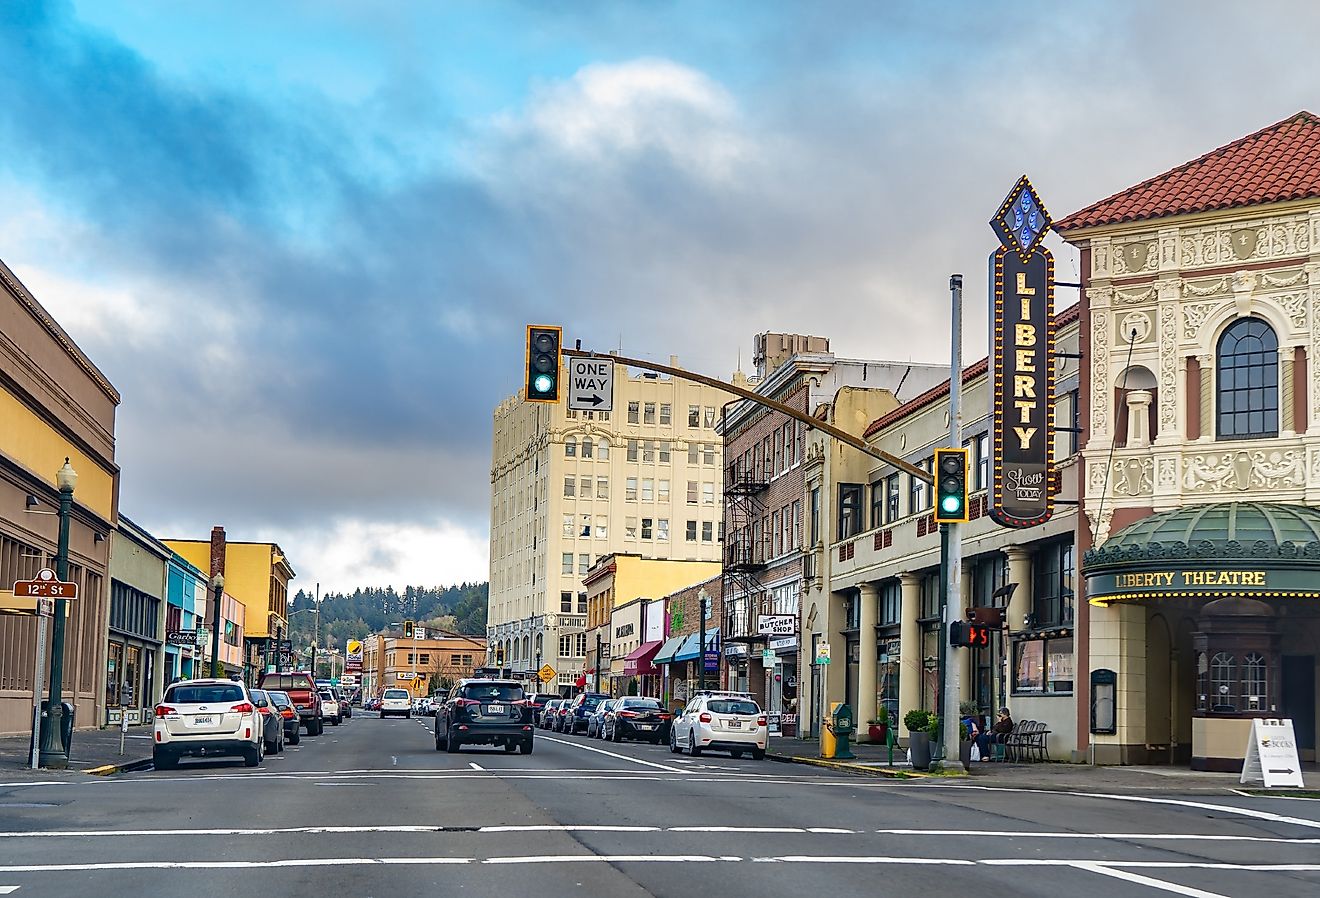 The Liberty Theater and downtown Astoria, Oregon.